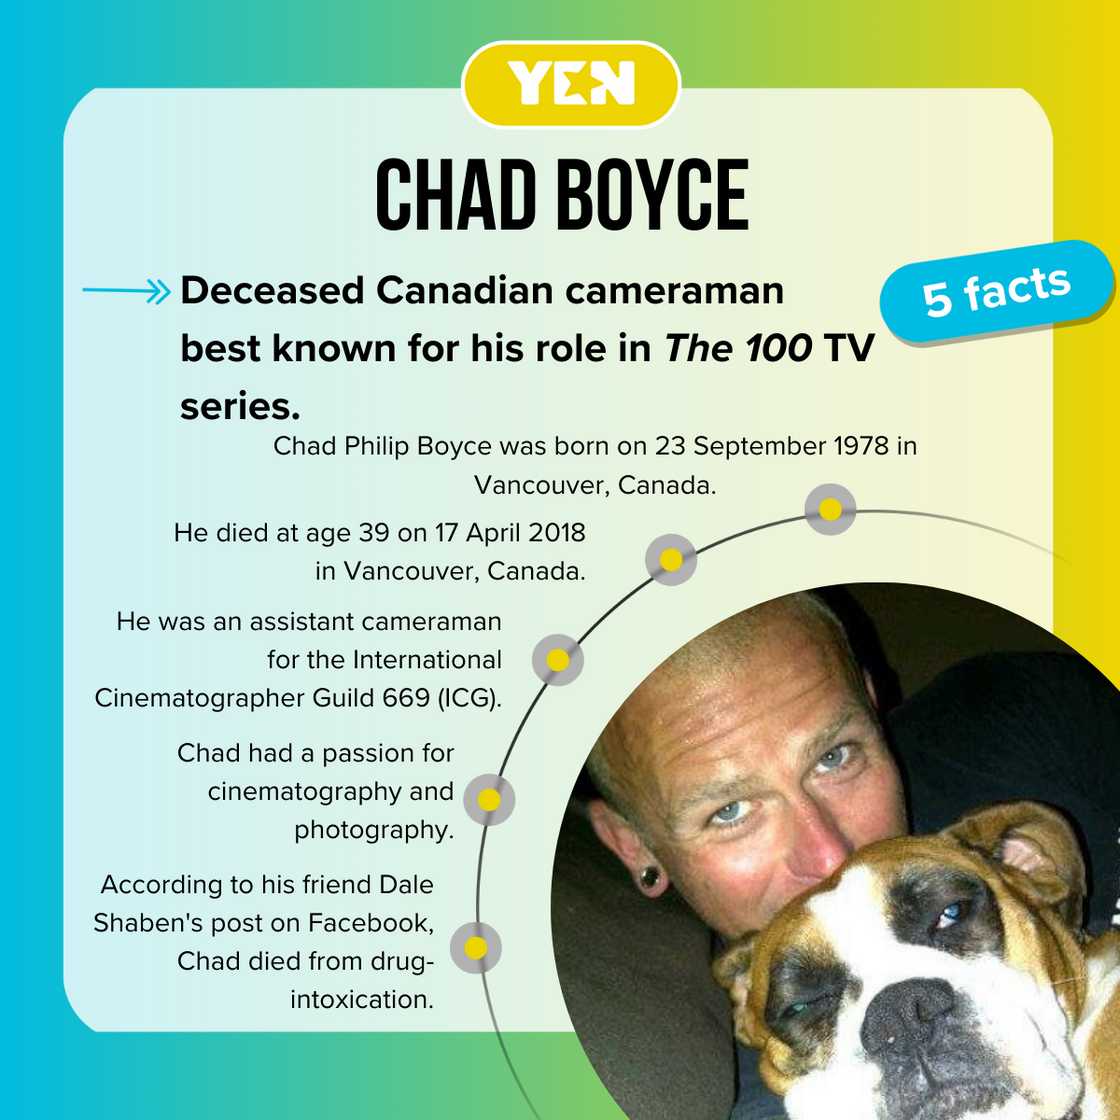 Top facts about Chad Boyce.